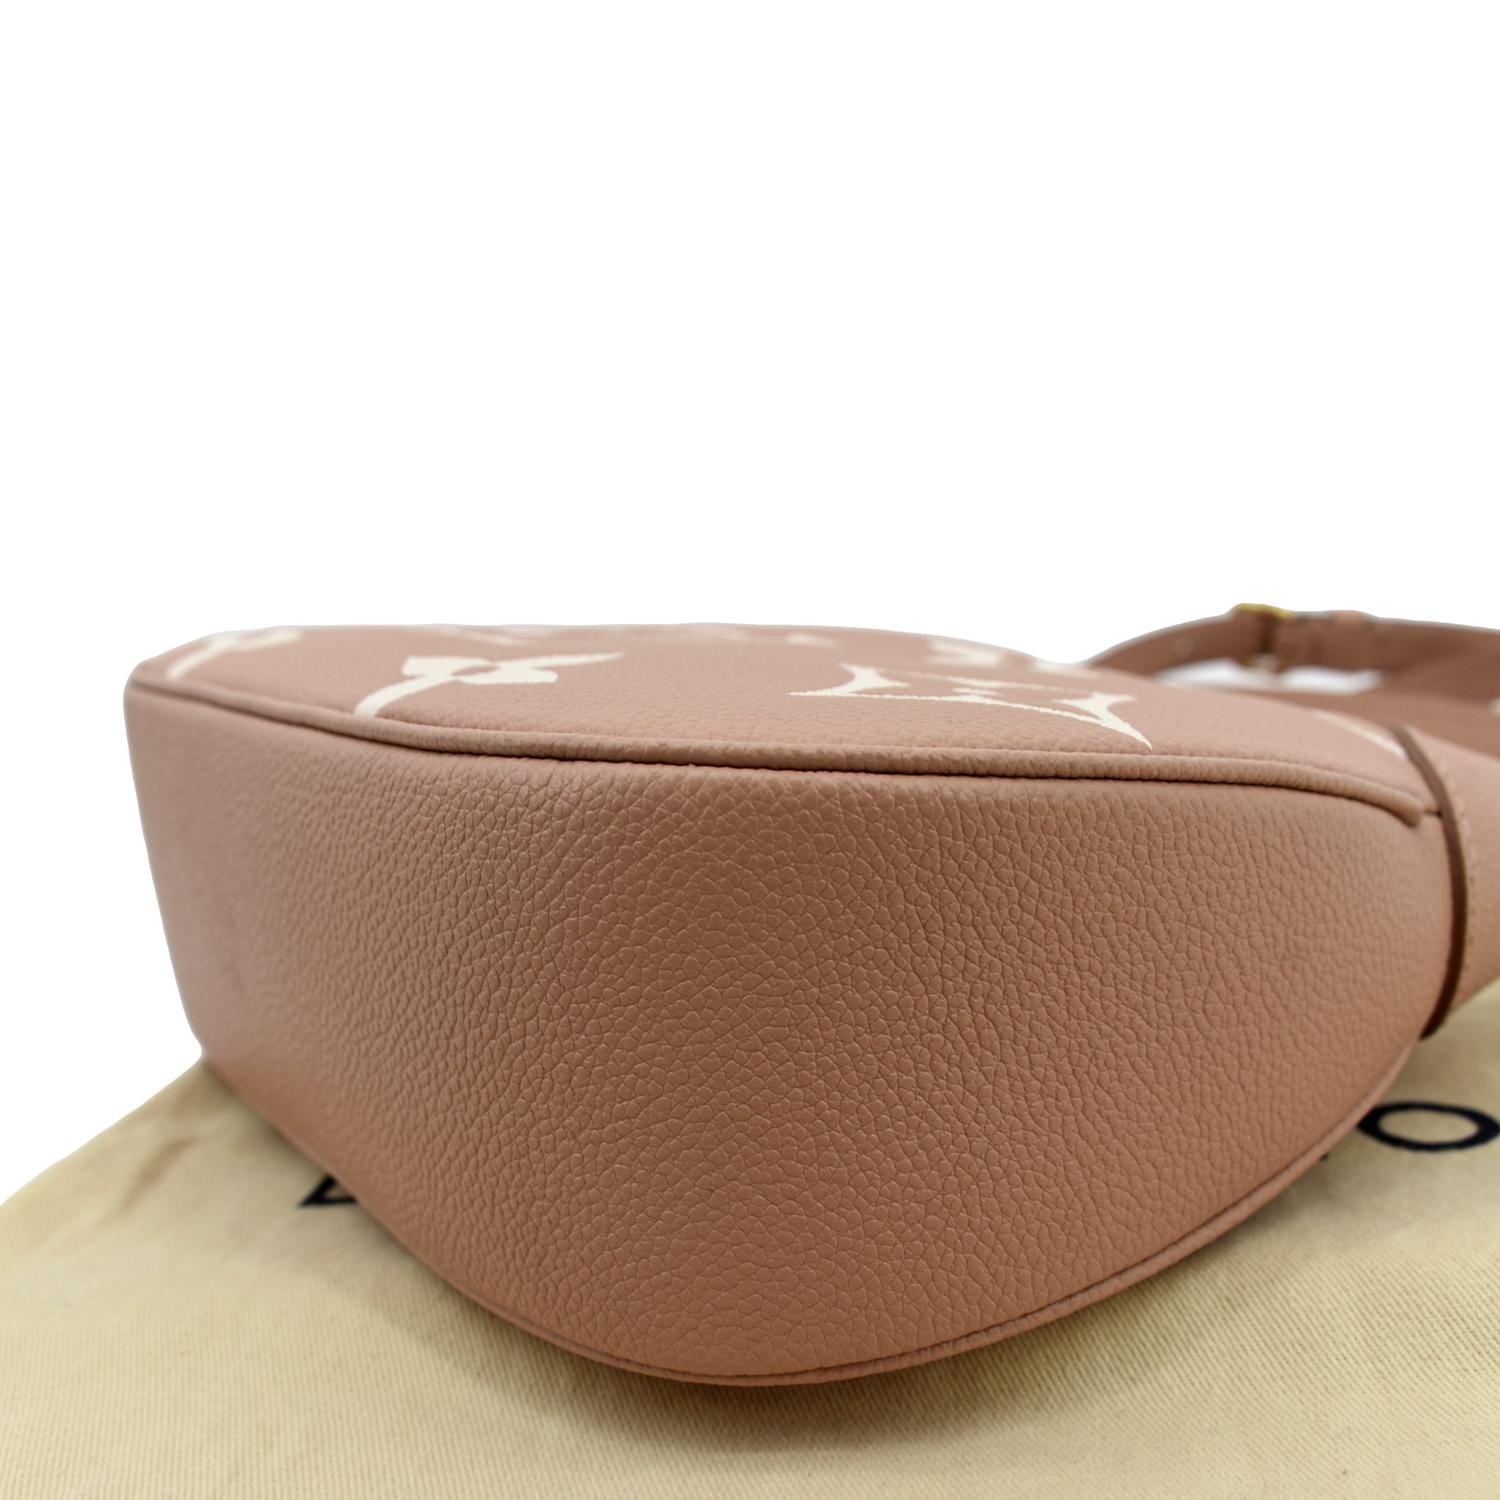 Bagatelle leather crossbody bag Louis Vuitton Pink in Leather